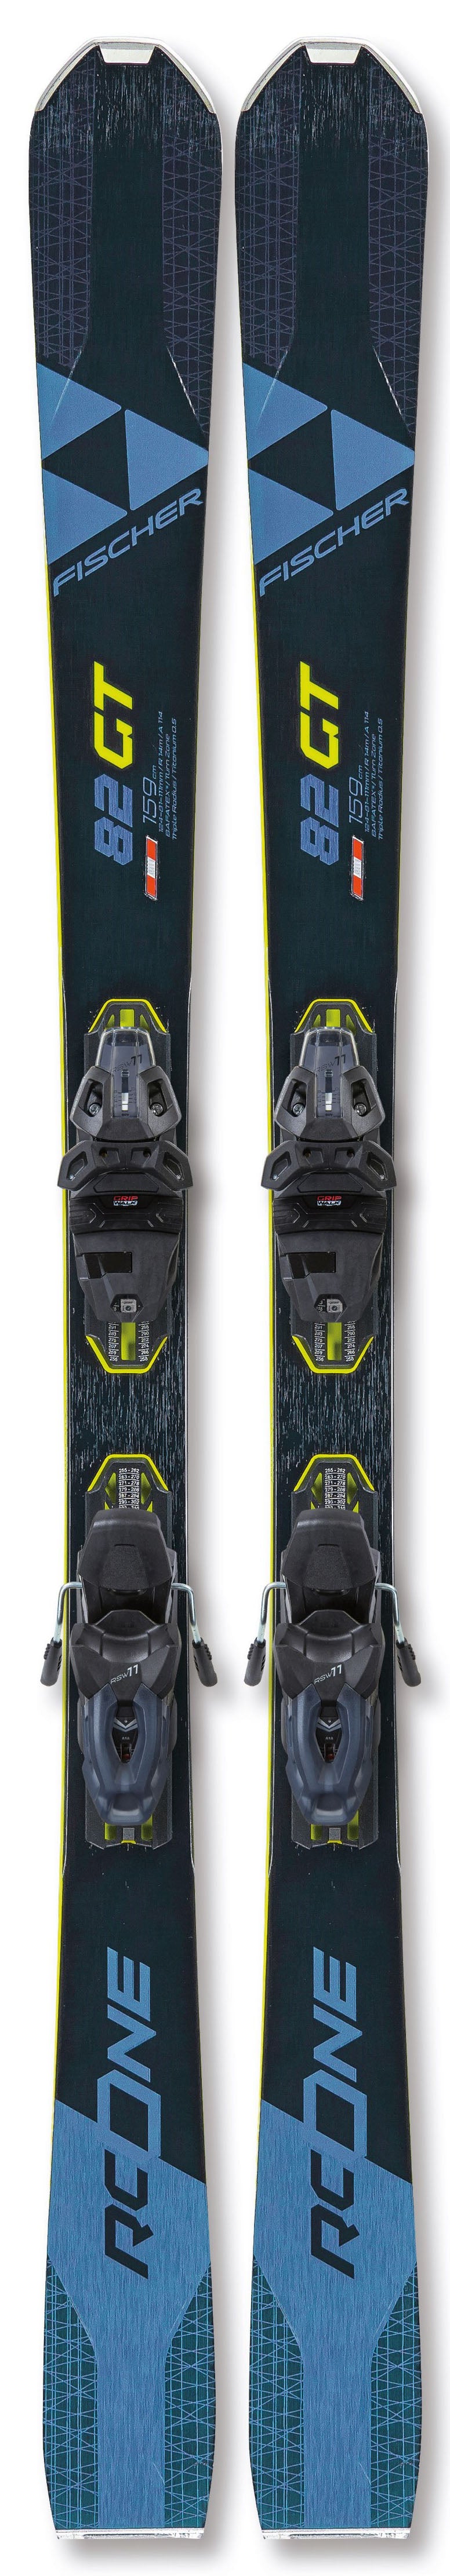 Fischer RC One 82 GT WS Skis 2021 w/bindings